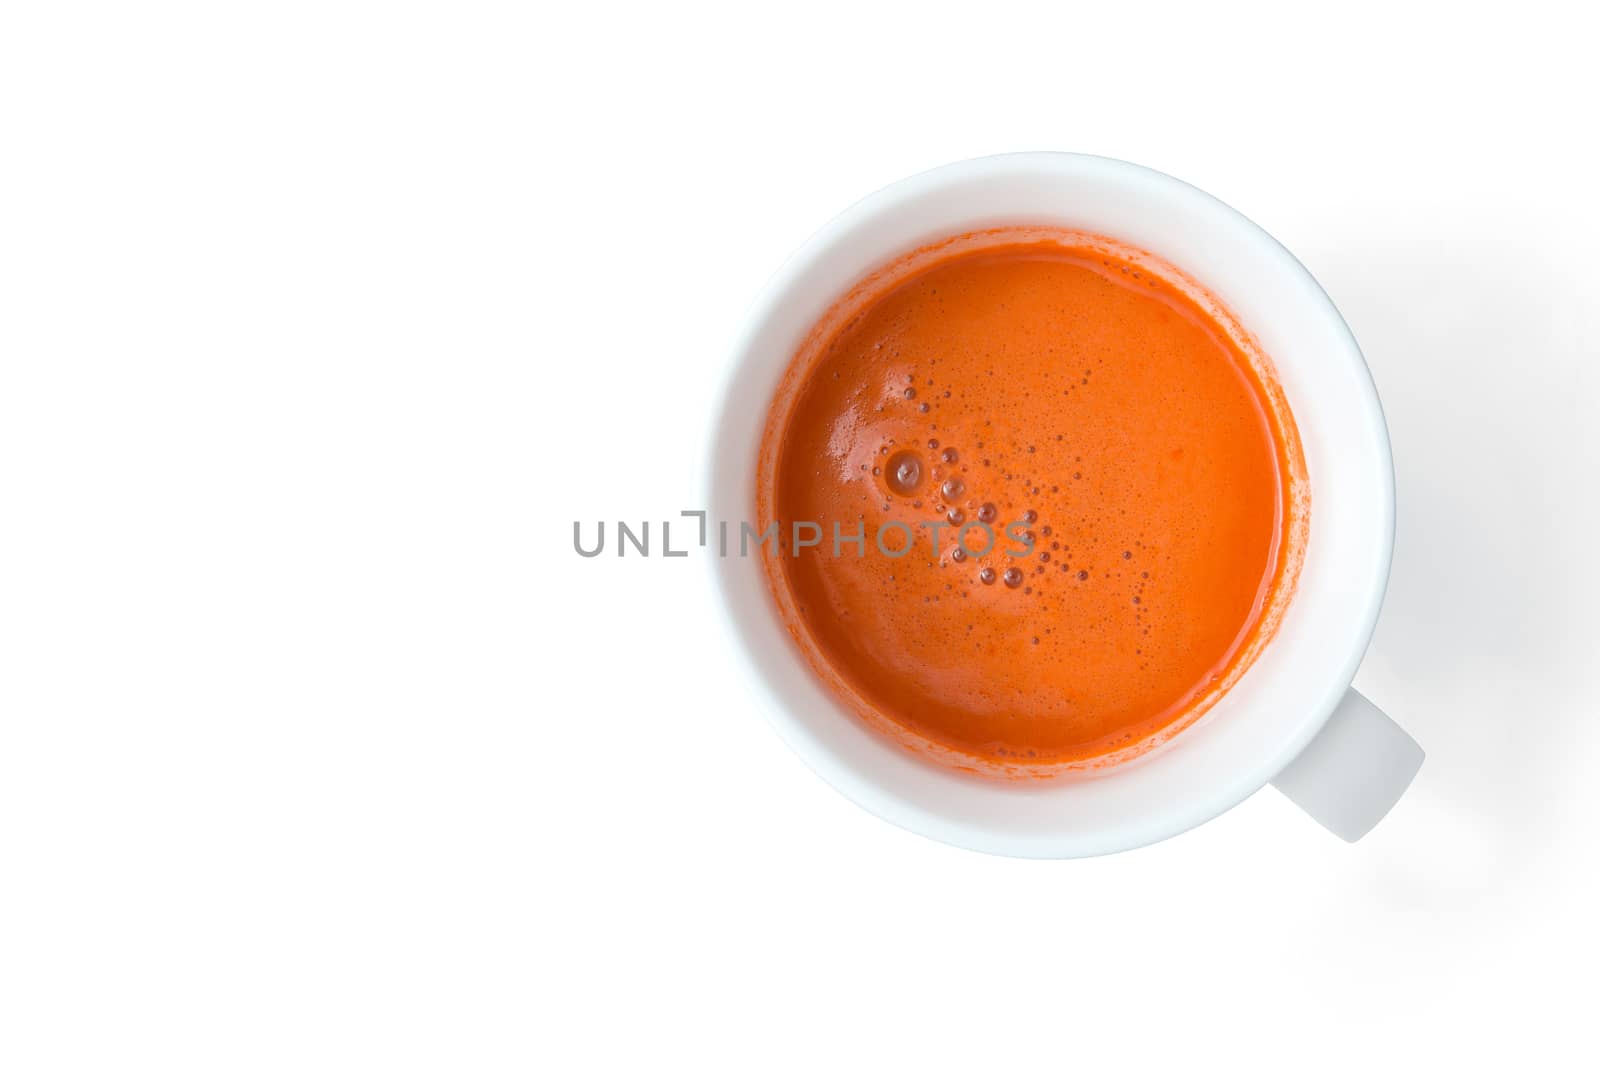 grass of carrot juice by antpkr